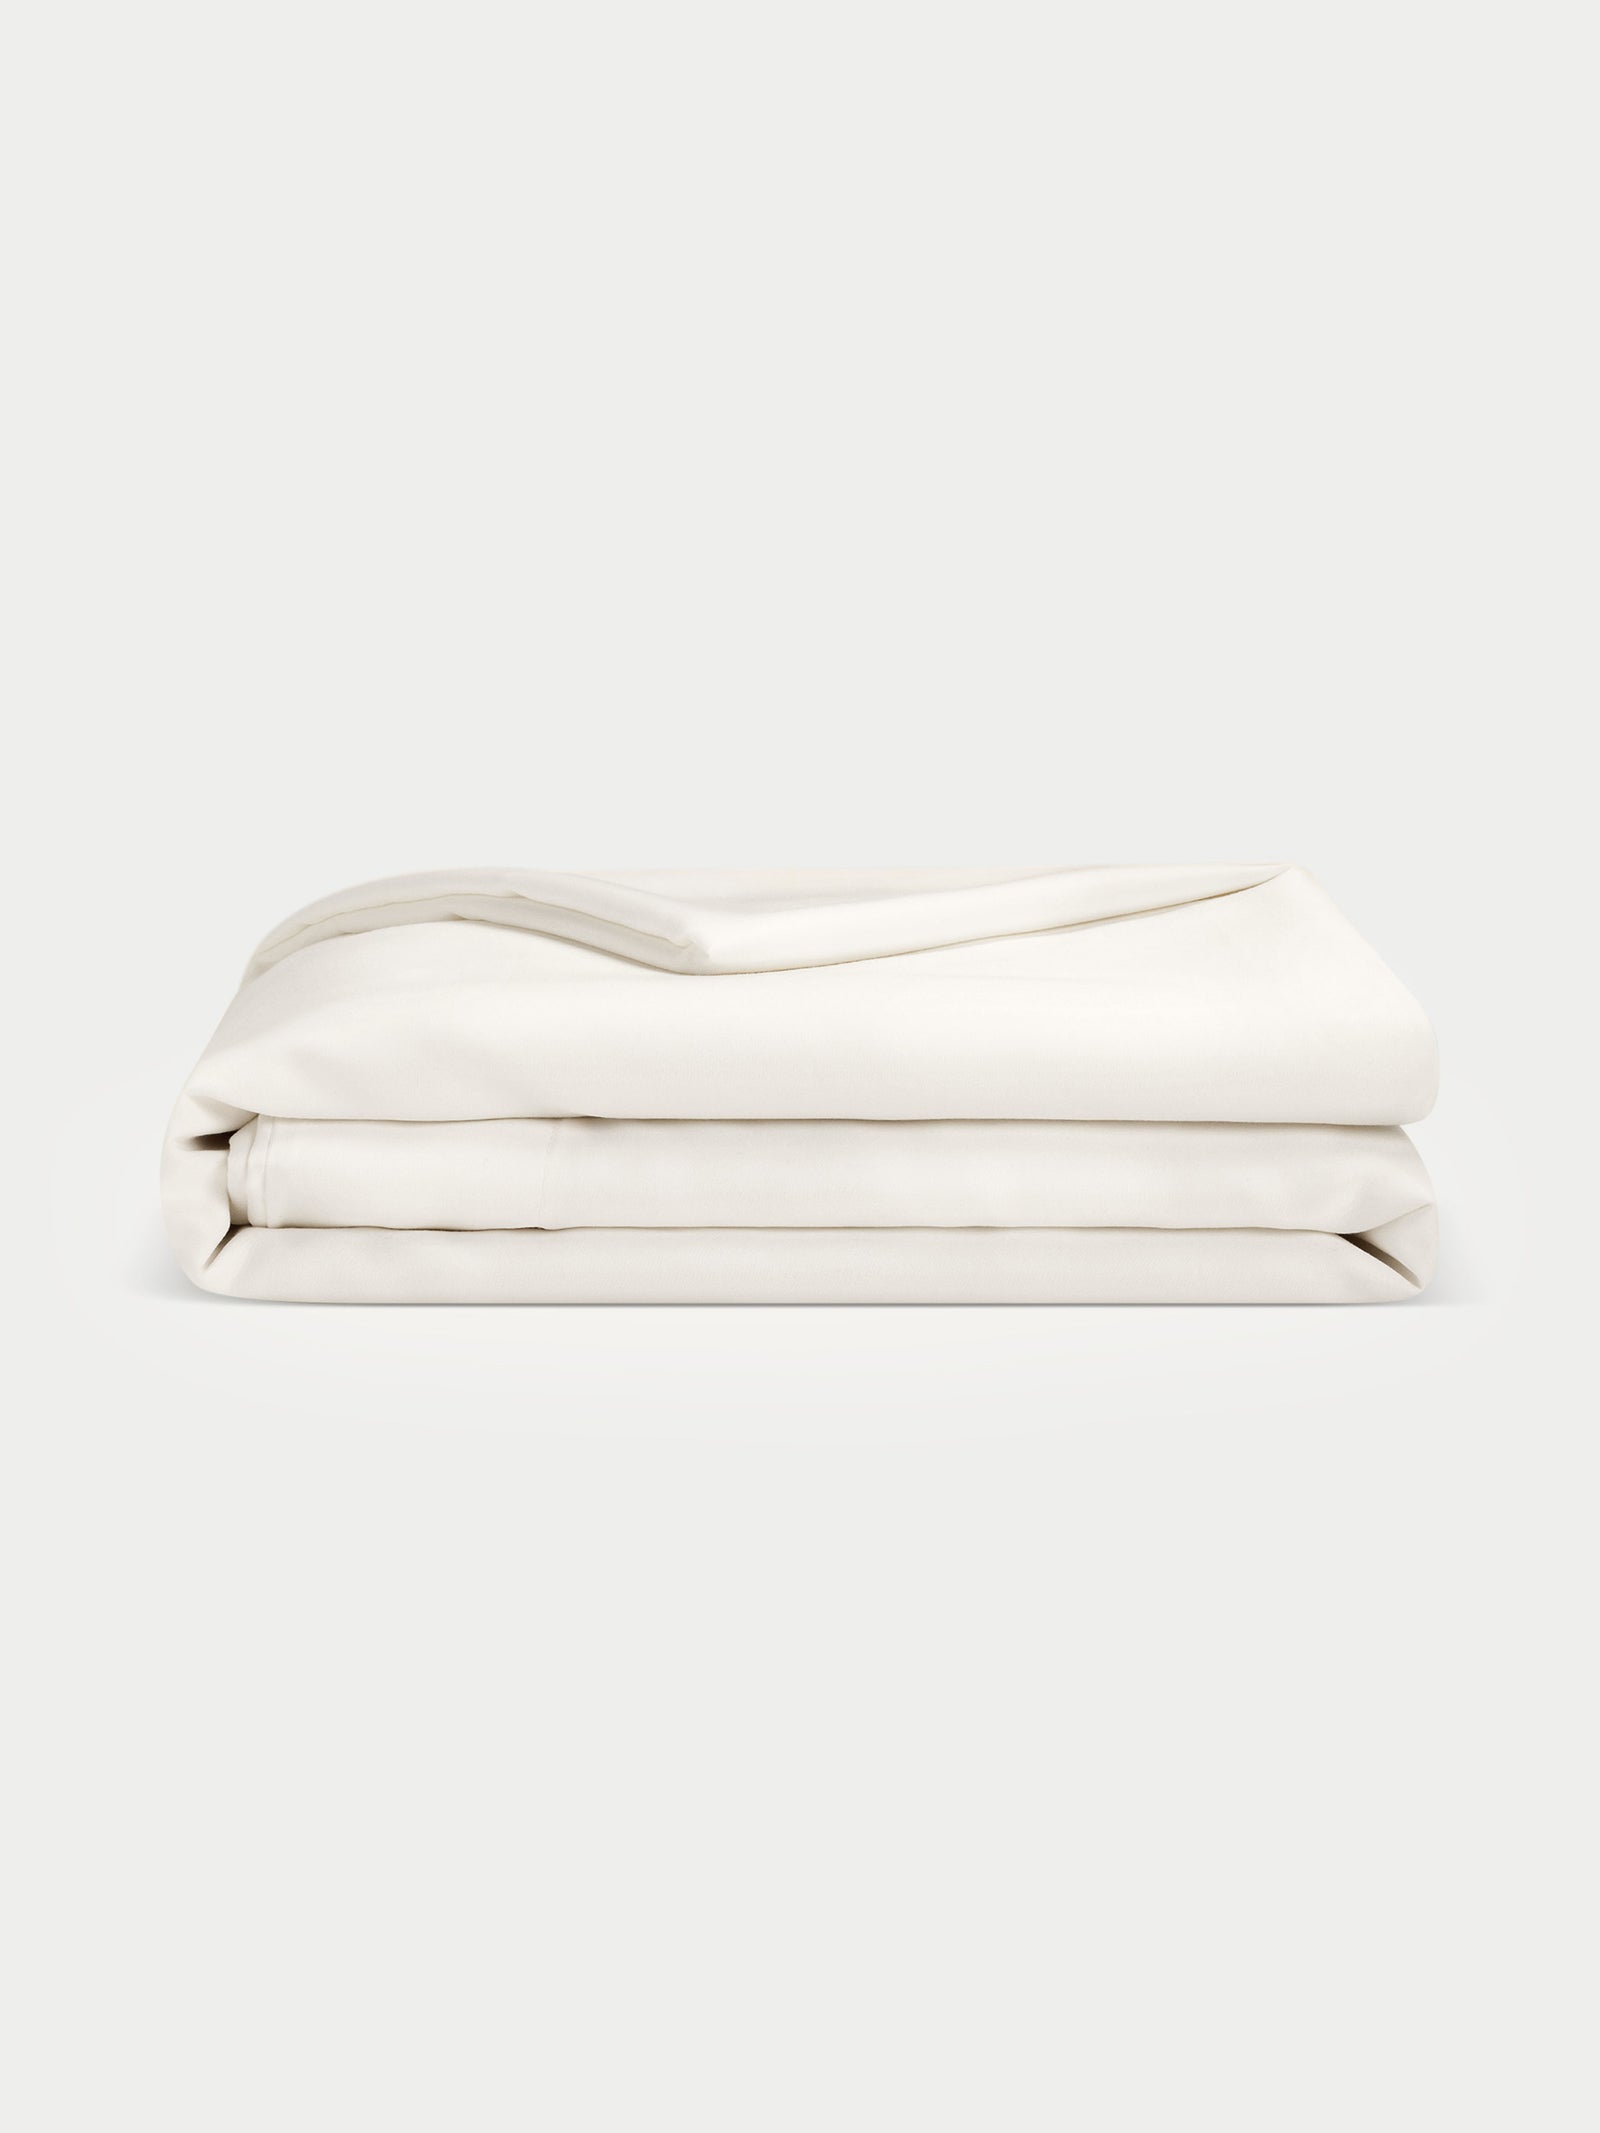 Creme duvet cover folded with white background 